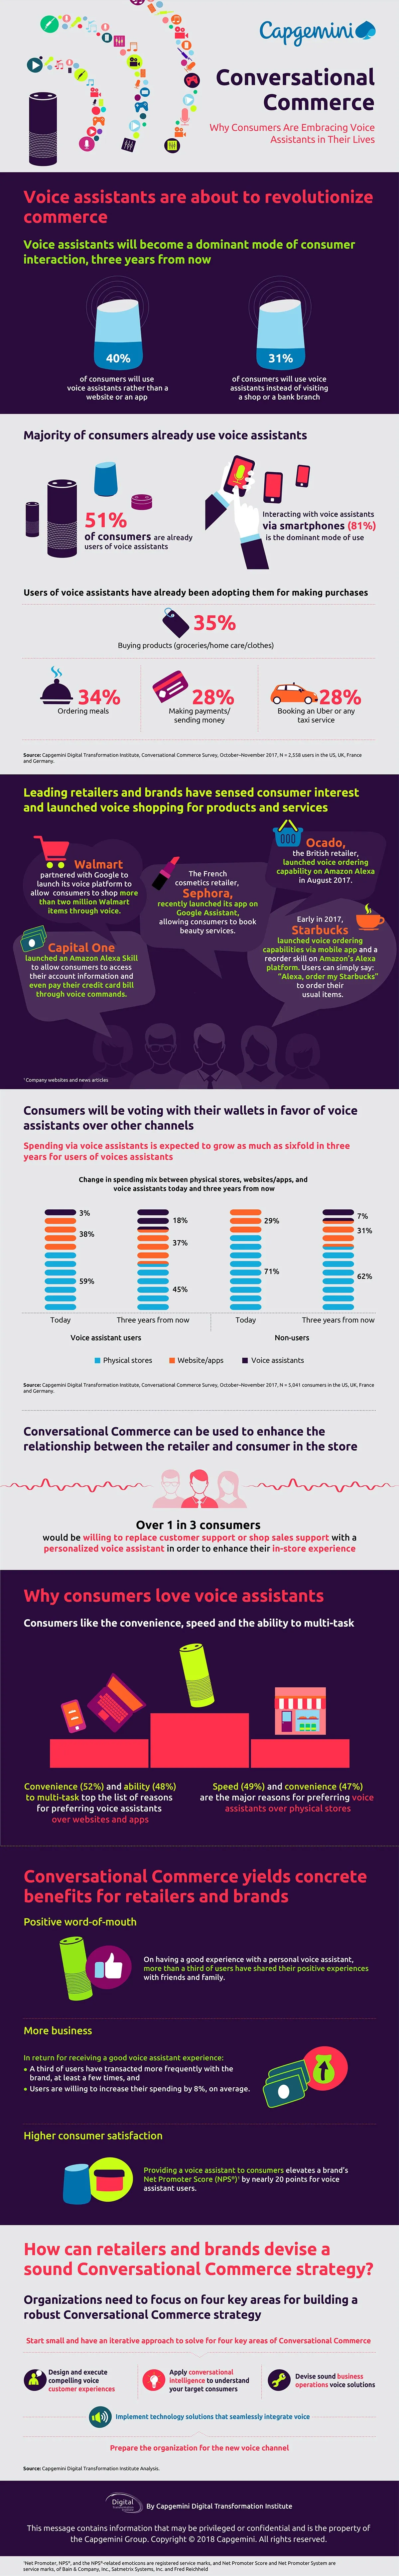 Conversational Commerce: Why Consumers Are Embracing Voice Assistants in Their Lives - #infographic